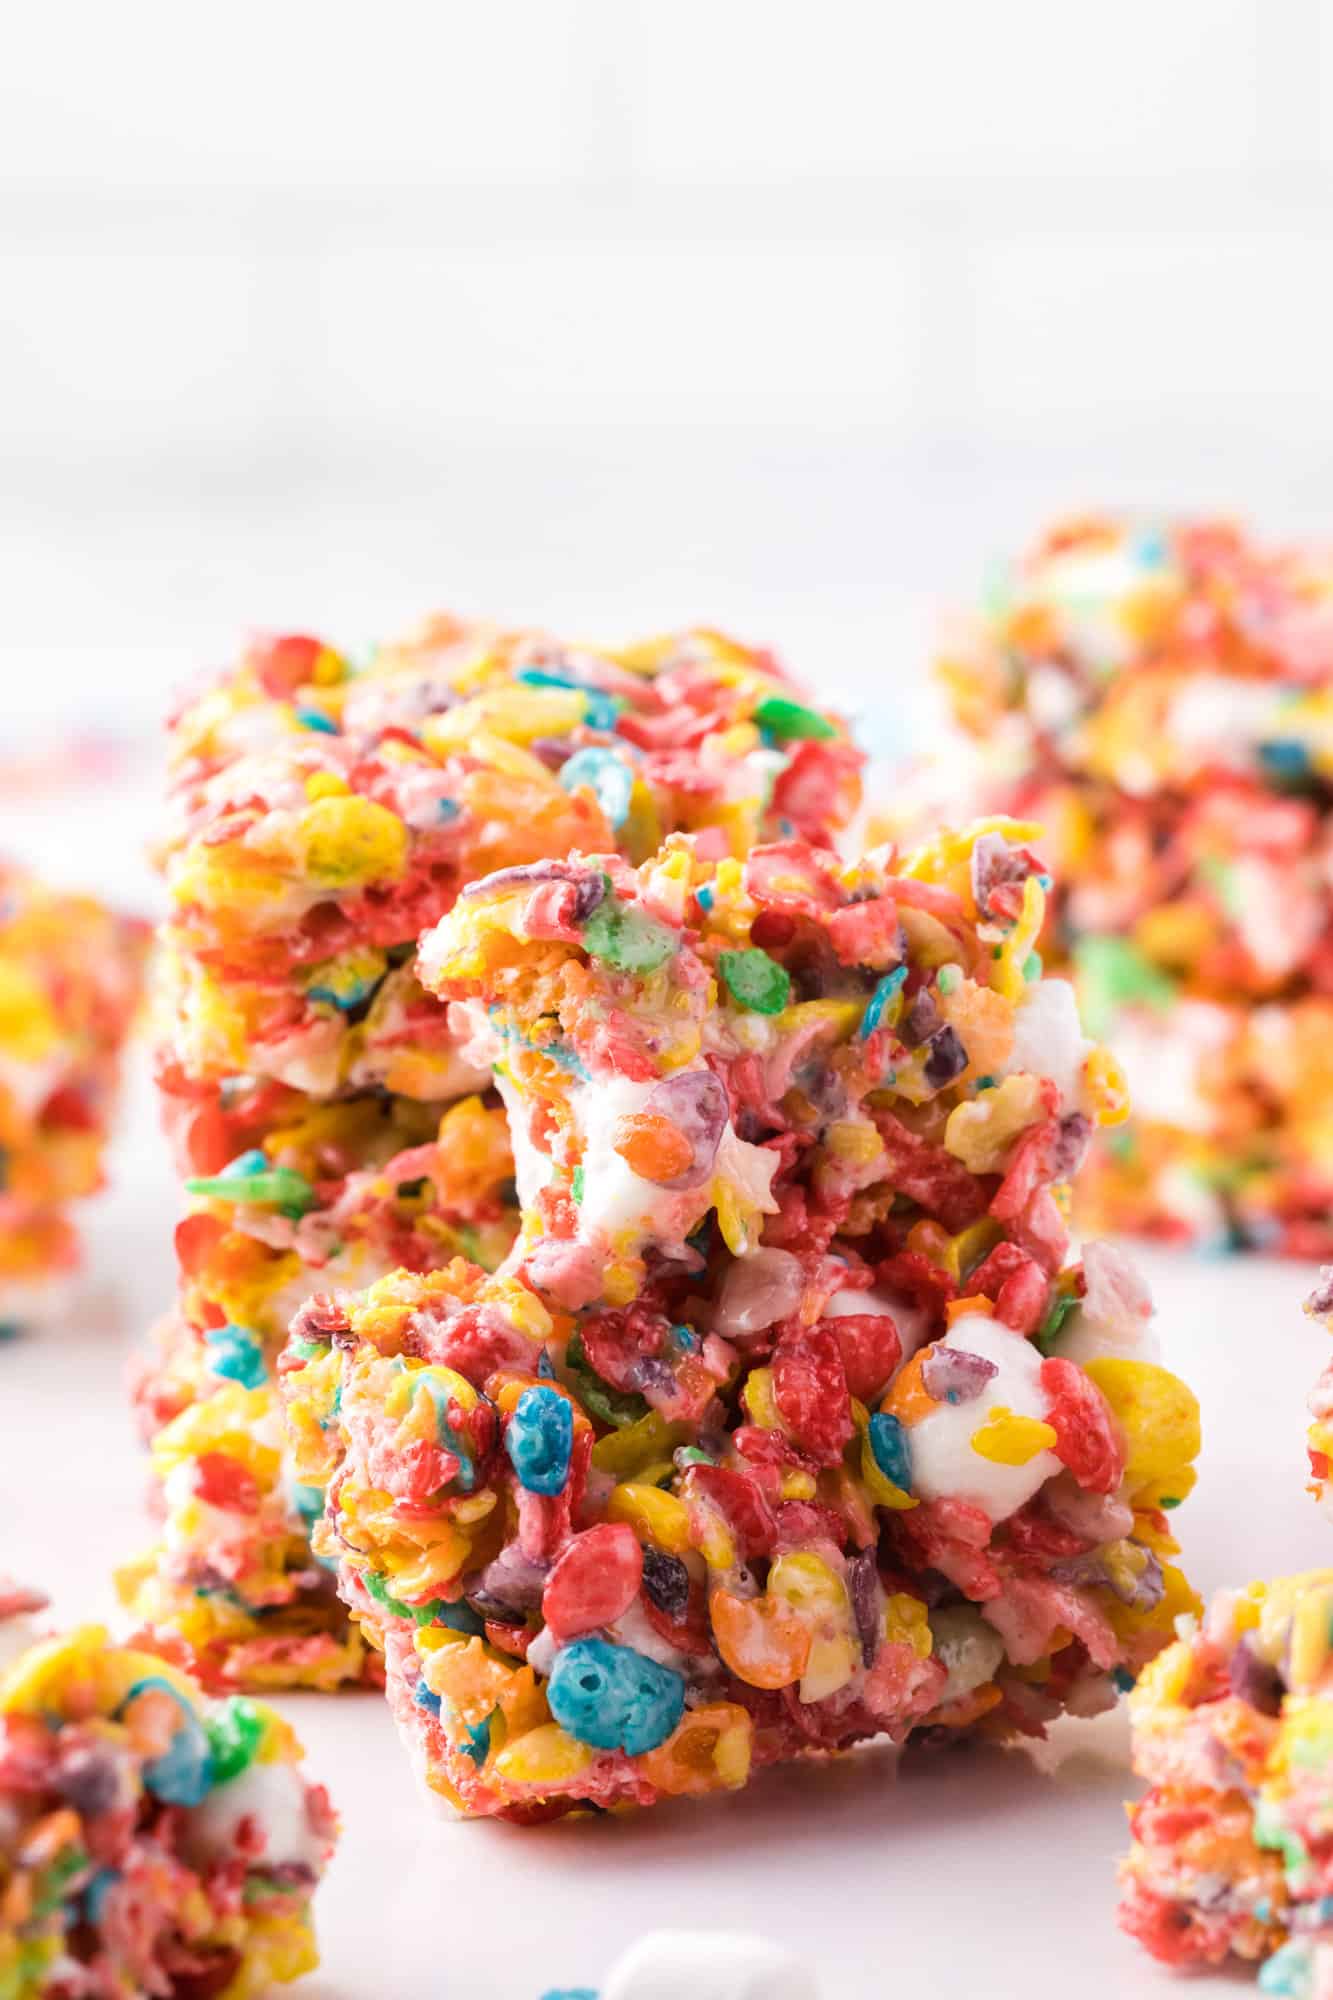 A stack of three Fruity Pebbles treats propping up a treat with a bite missing.